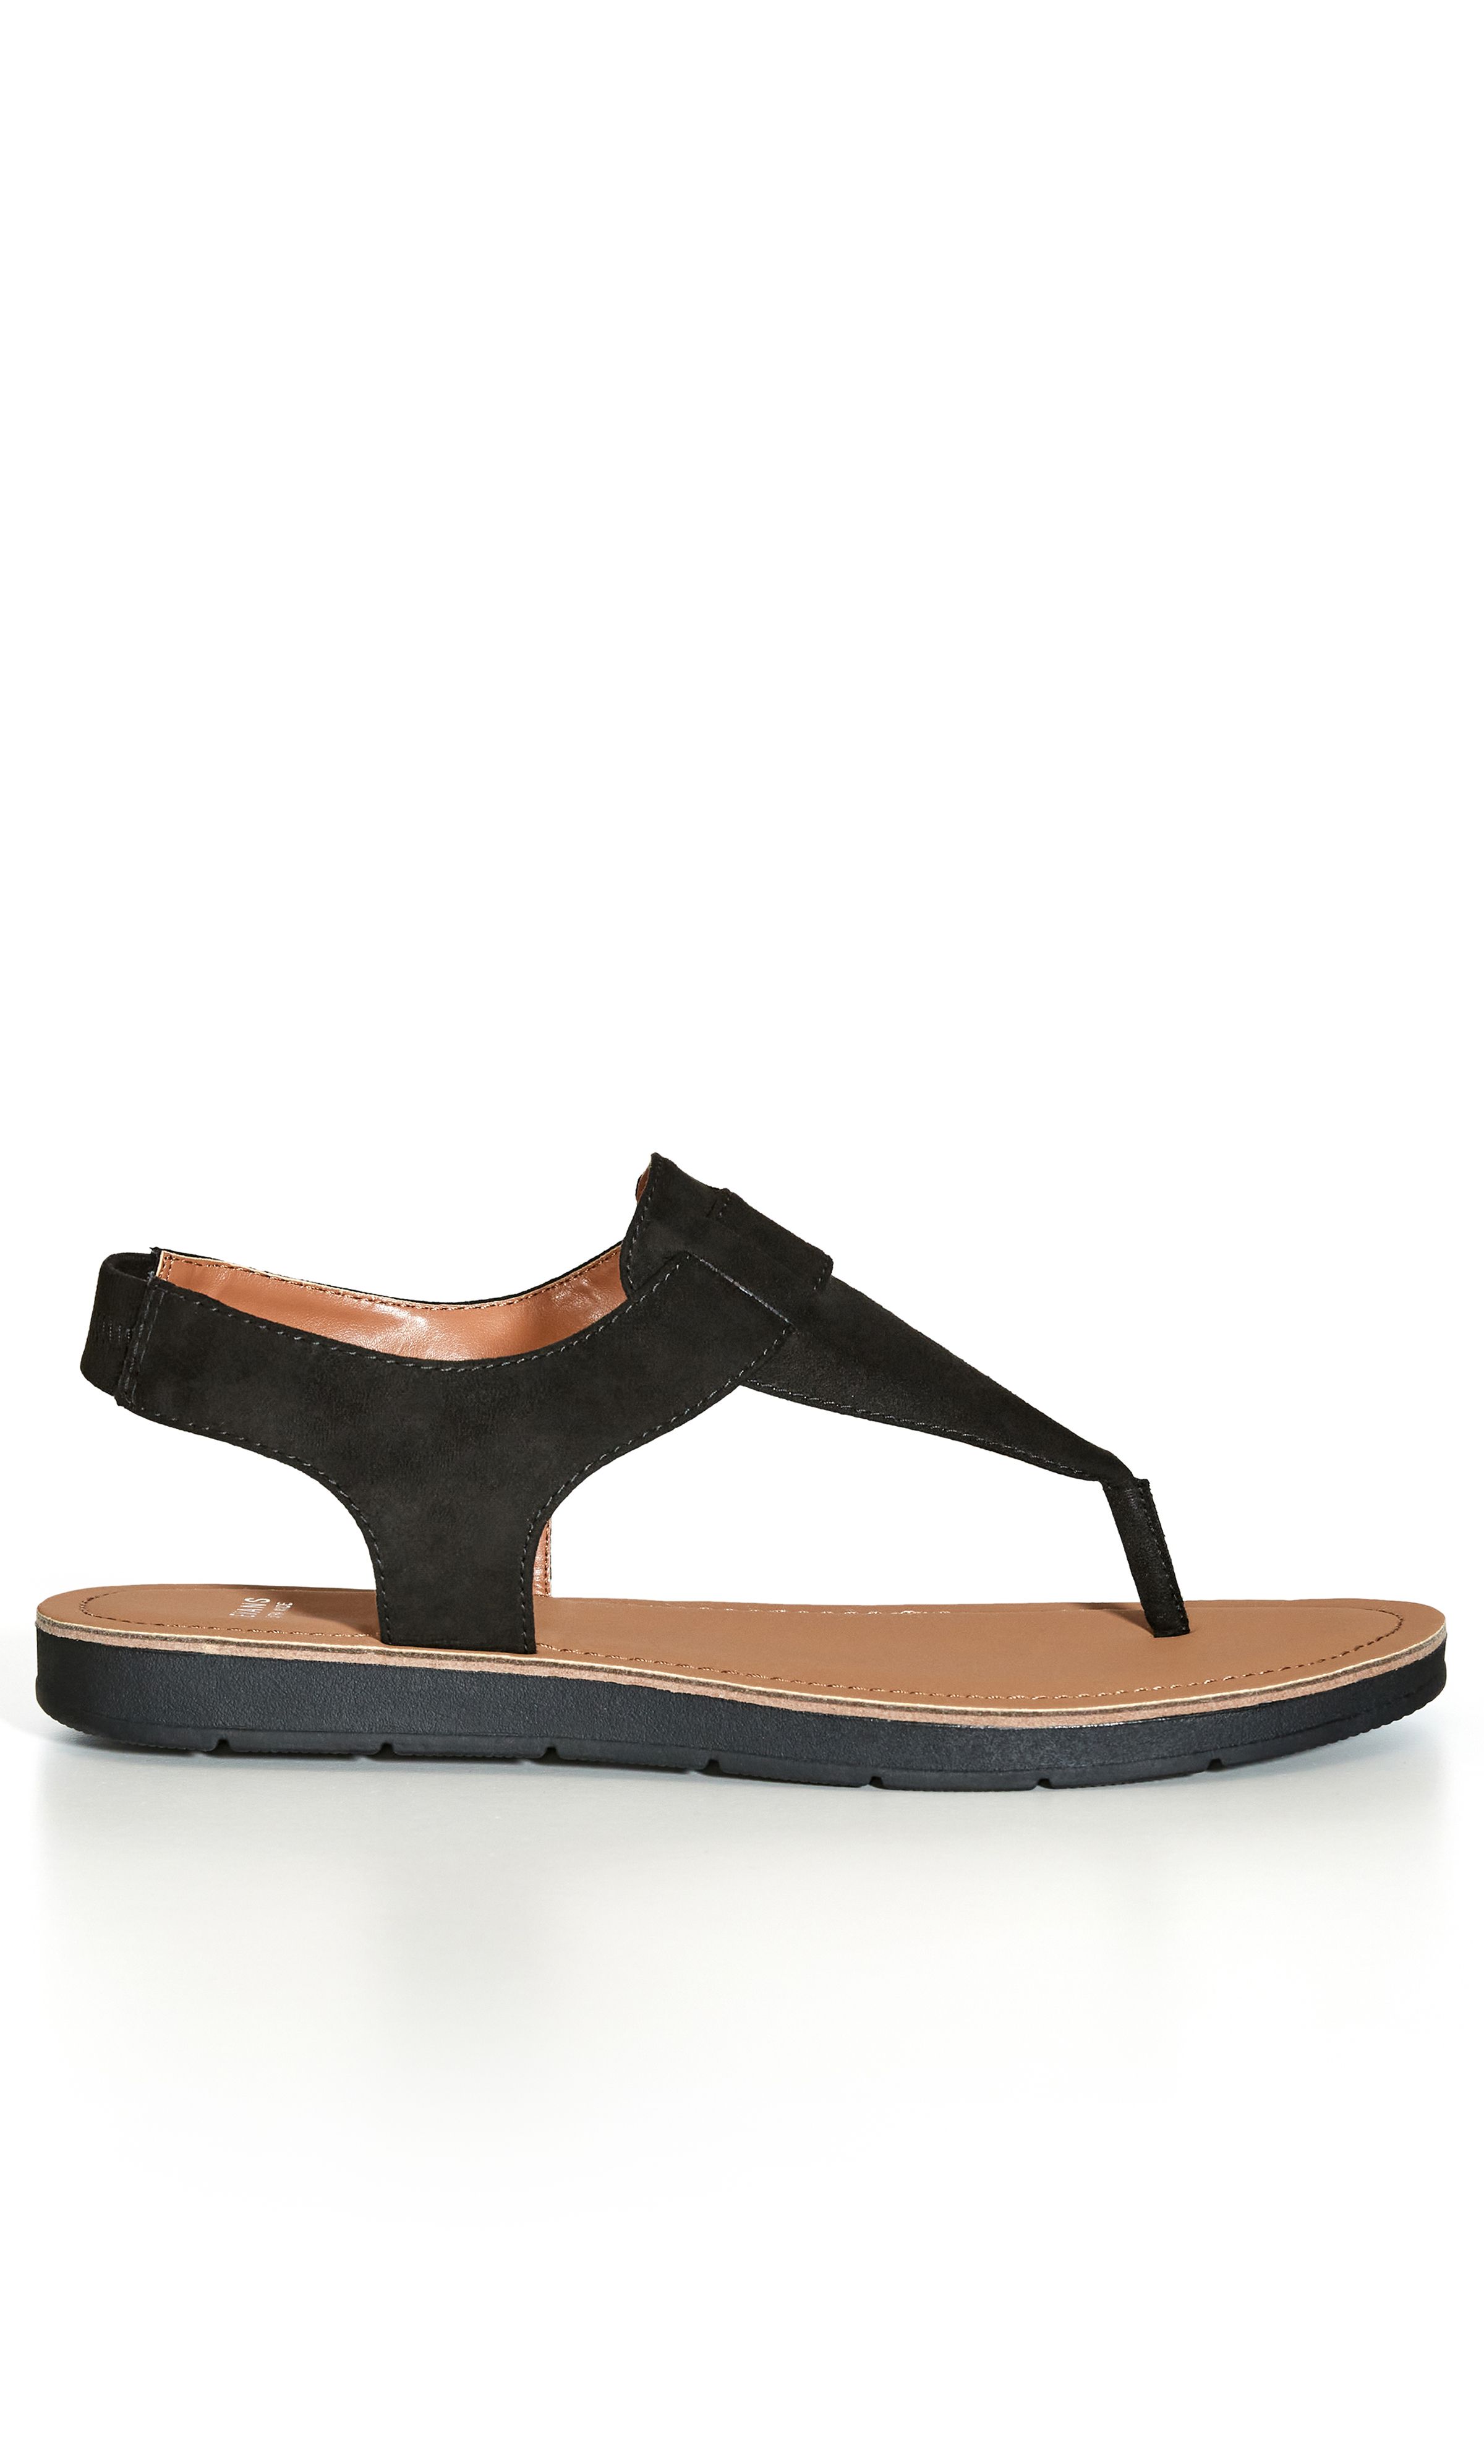 The Lexie Slingback Sandal is a simple yet chic choice, offering a minimalist toe post design and faux suede fabrication. Designed in a comfortable wide fit, you'll be reaching for this fashion-forward pair every weekend without fail! Key Features Include: - Round toe - Toe post design - Suede feel fabrication - Slip on style - Elasticated slingback - Chunky sole Complete your casual day look with a floral mini skirt, slogan tee and round rattan bag.